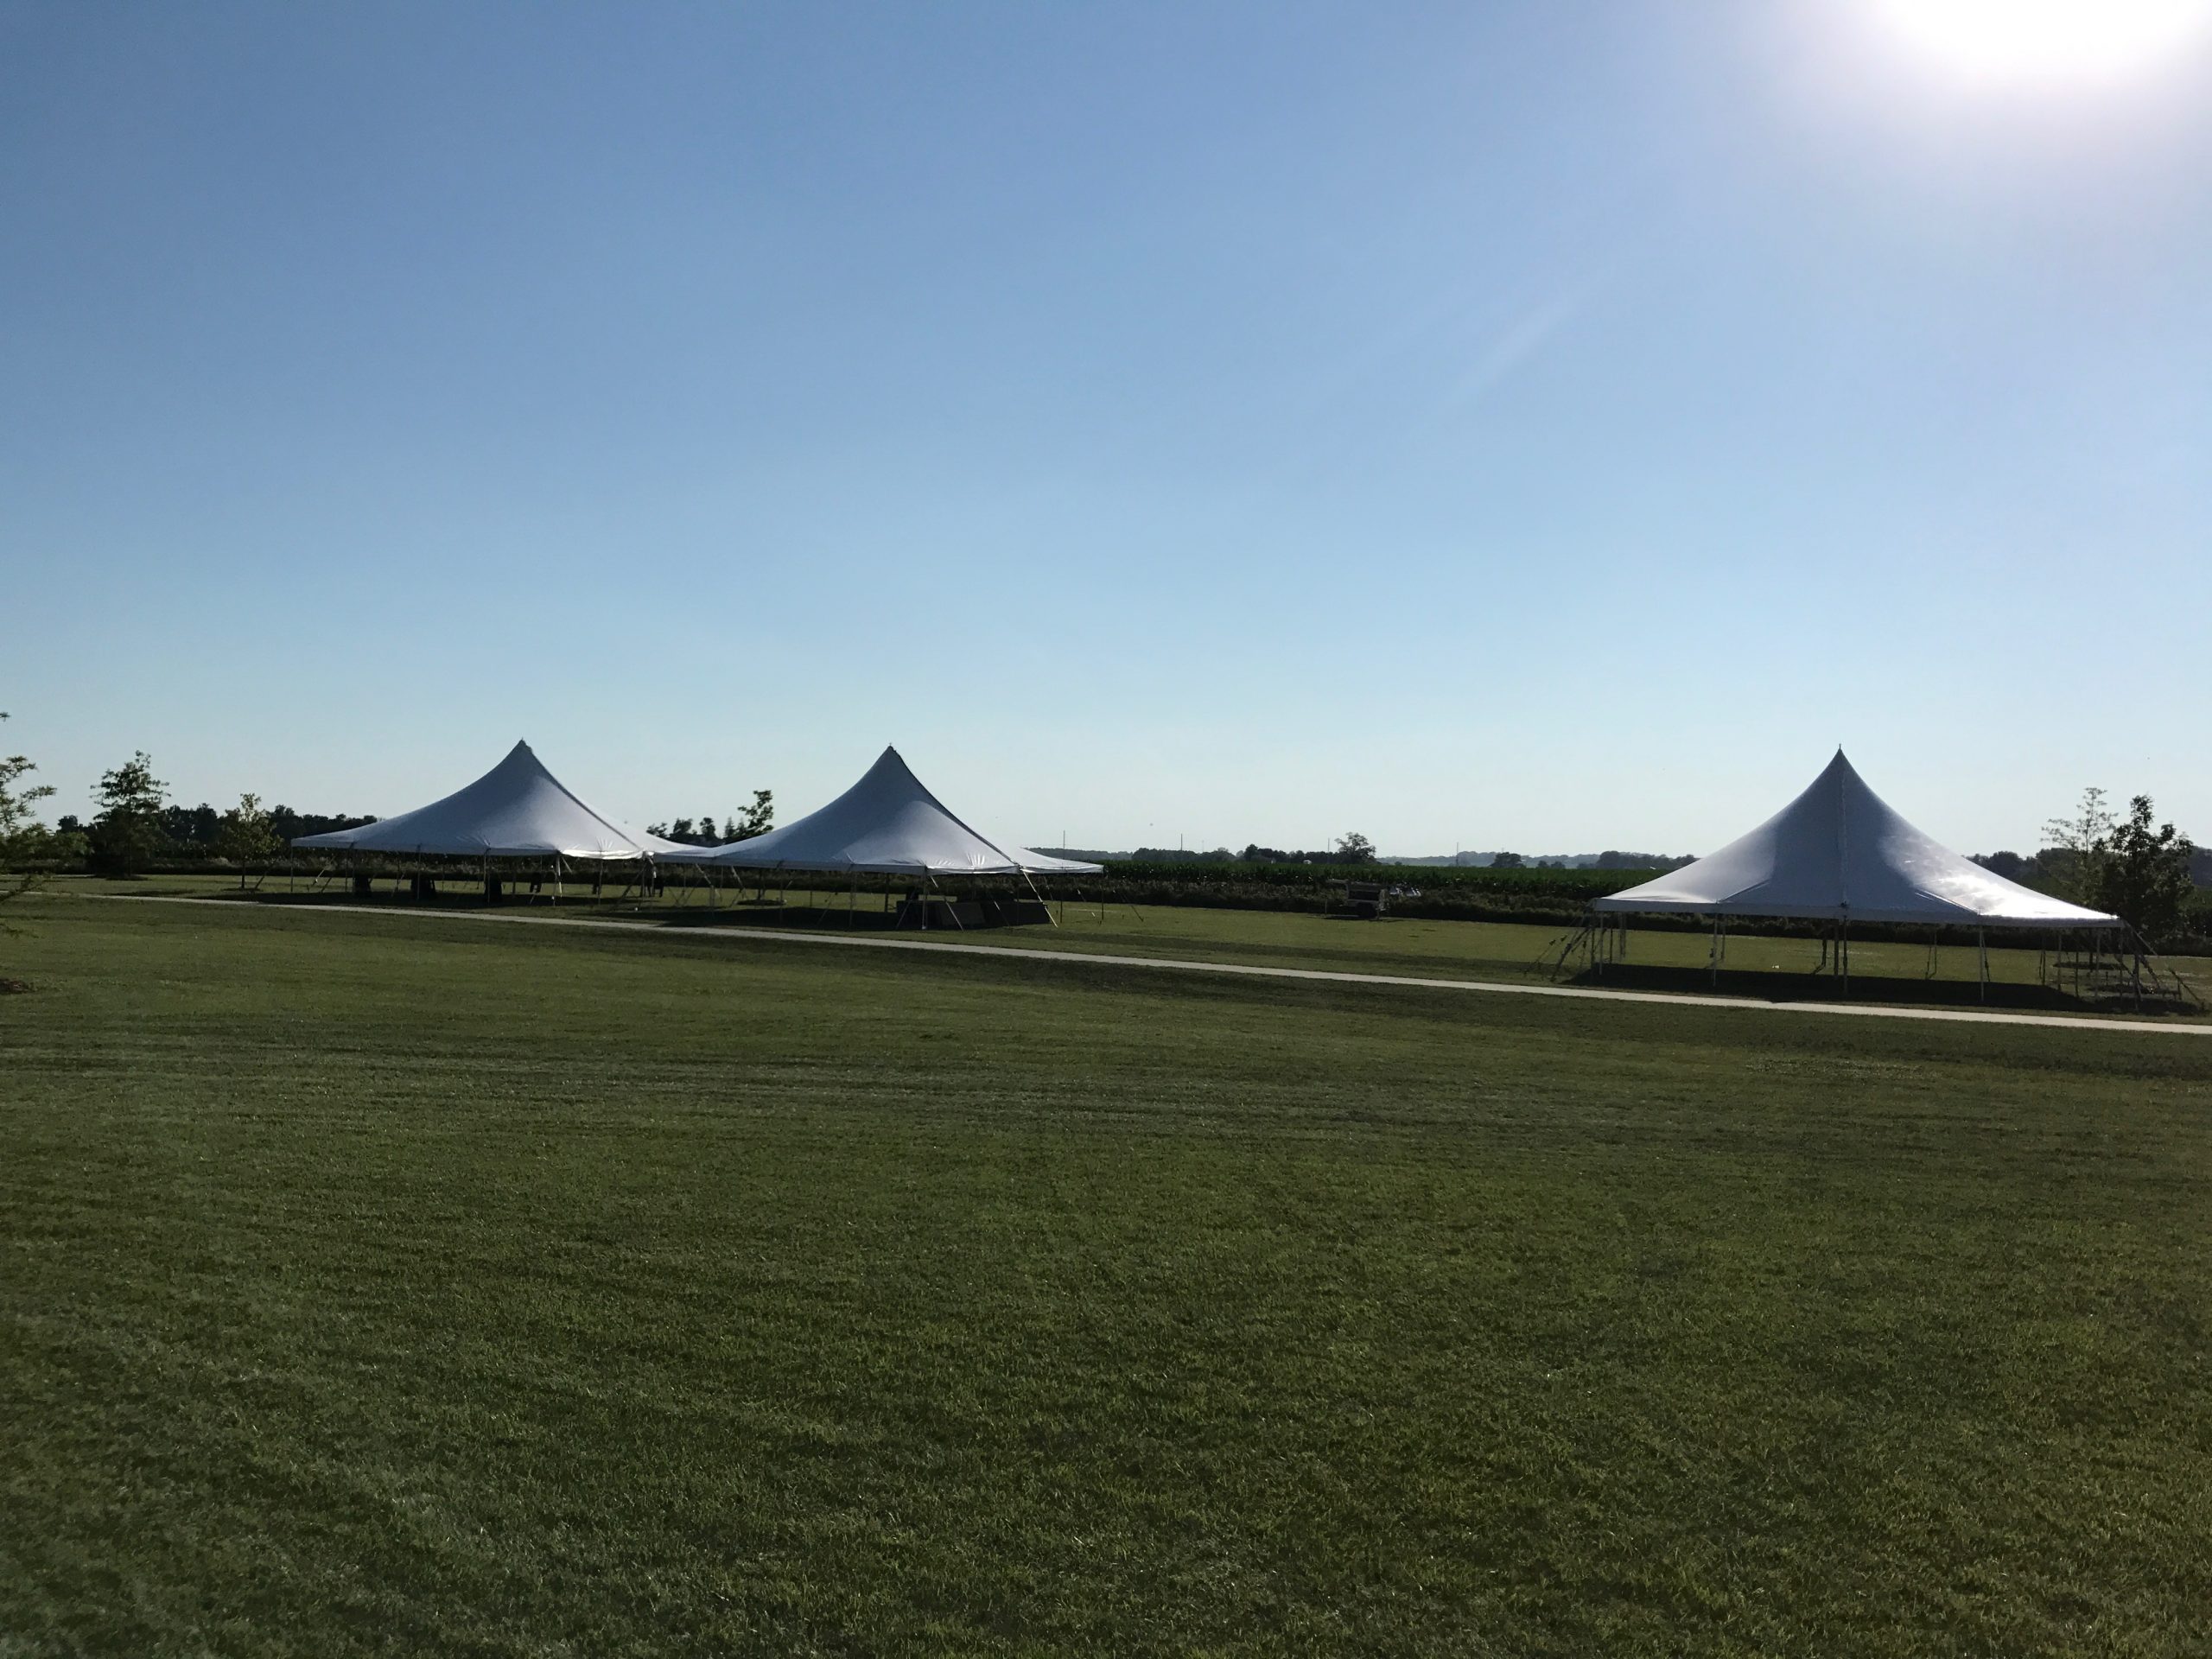 Three 40' x 40' rope and pole tent at the North Liberty Blues & BBQ festival at Centennial Park in North Liberty, Iowa